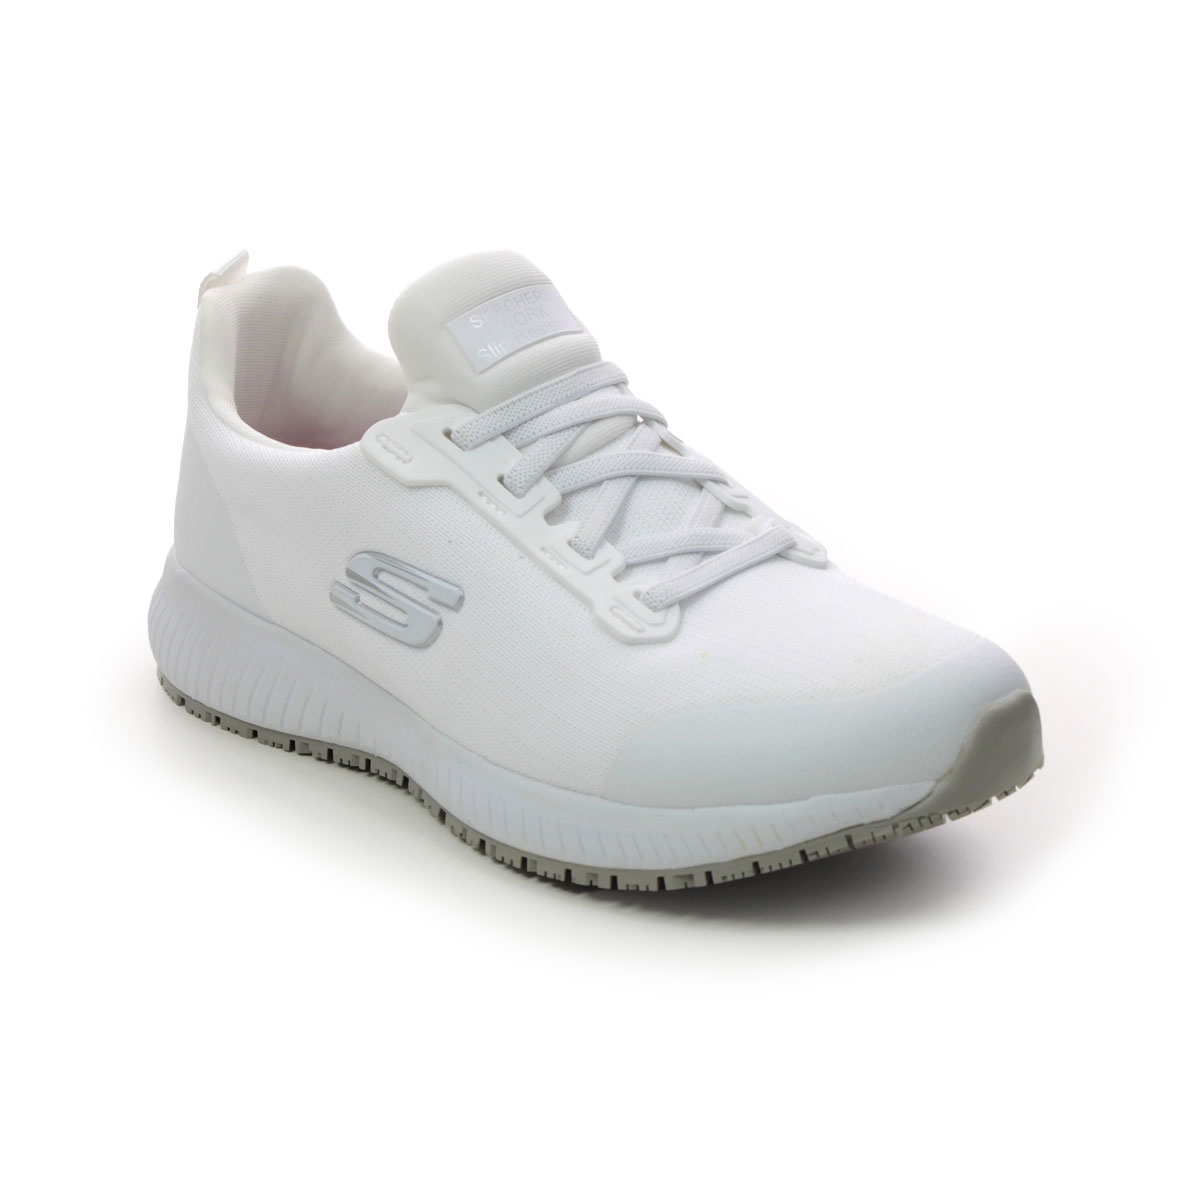 Skechers Work Squad Slip Resistant WHT White Womens trainers 77222EC in a Plain Textile in Size 6.5